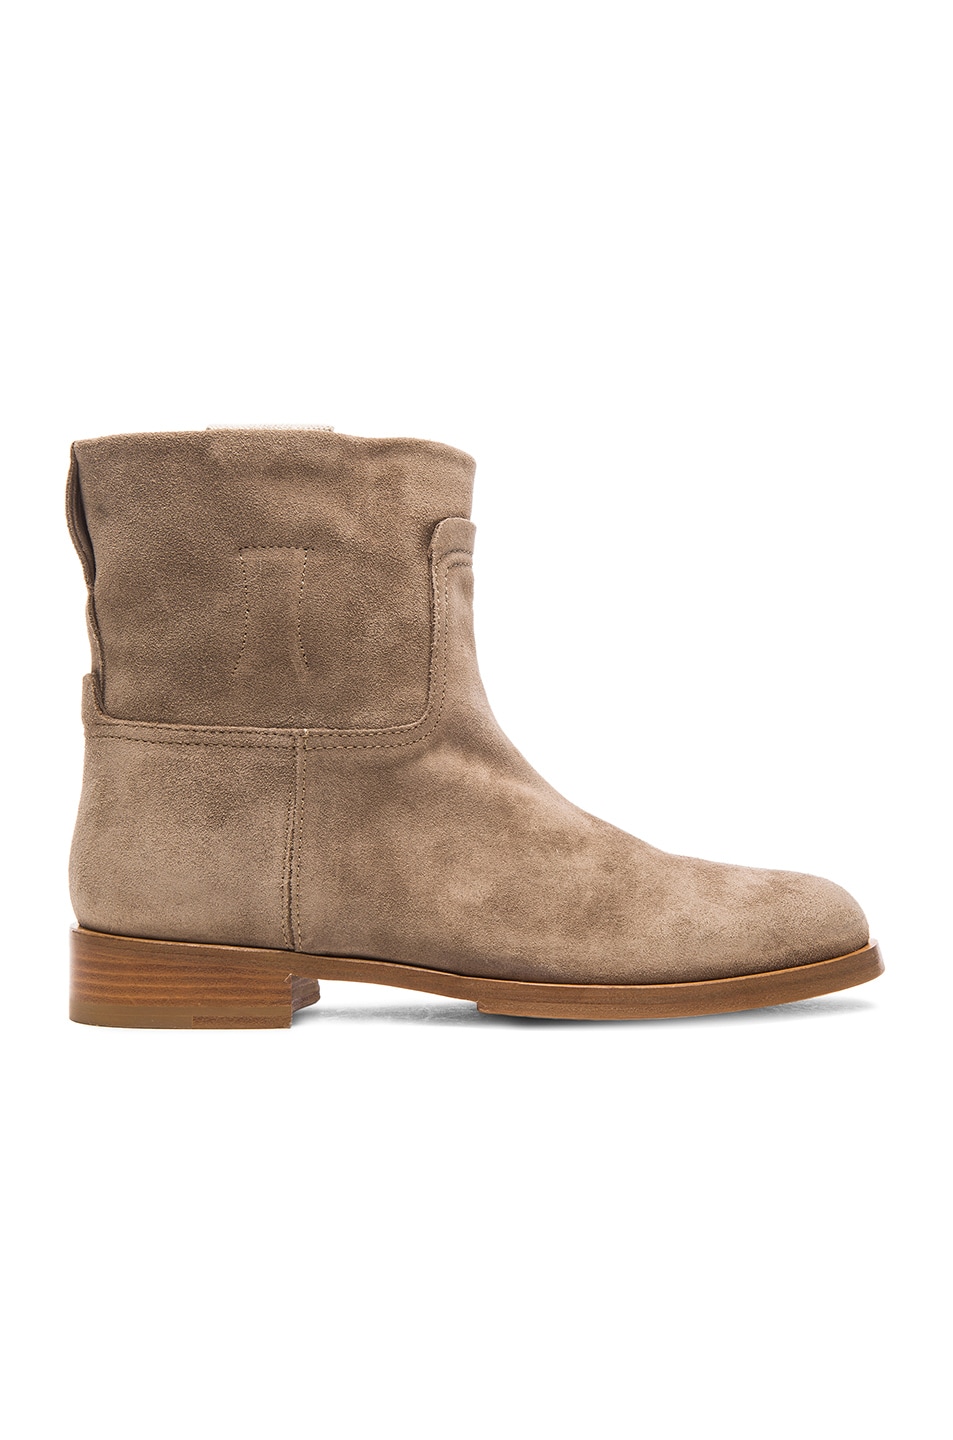 Image 1 of Rag & Bone Holly Ankle Boots in Stone Suede